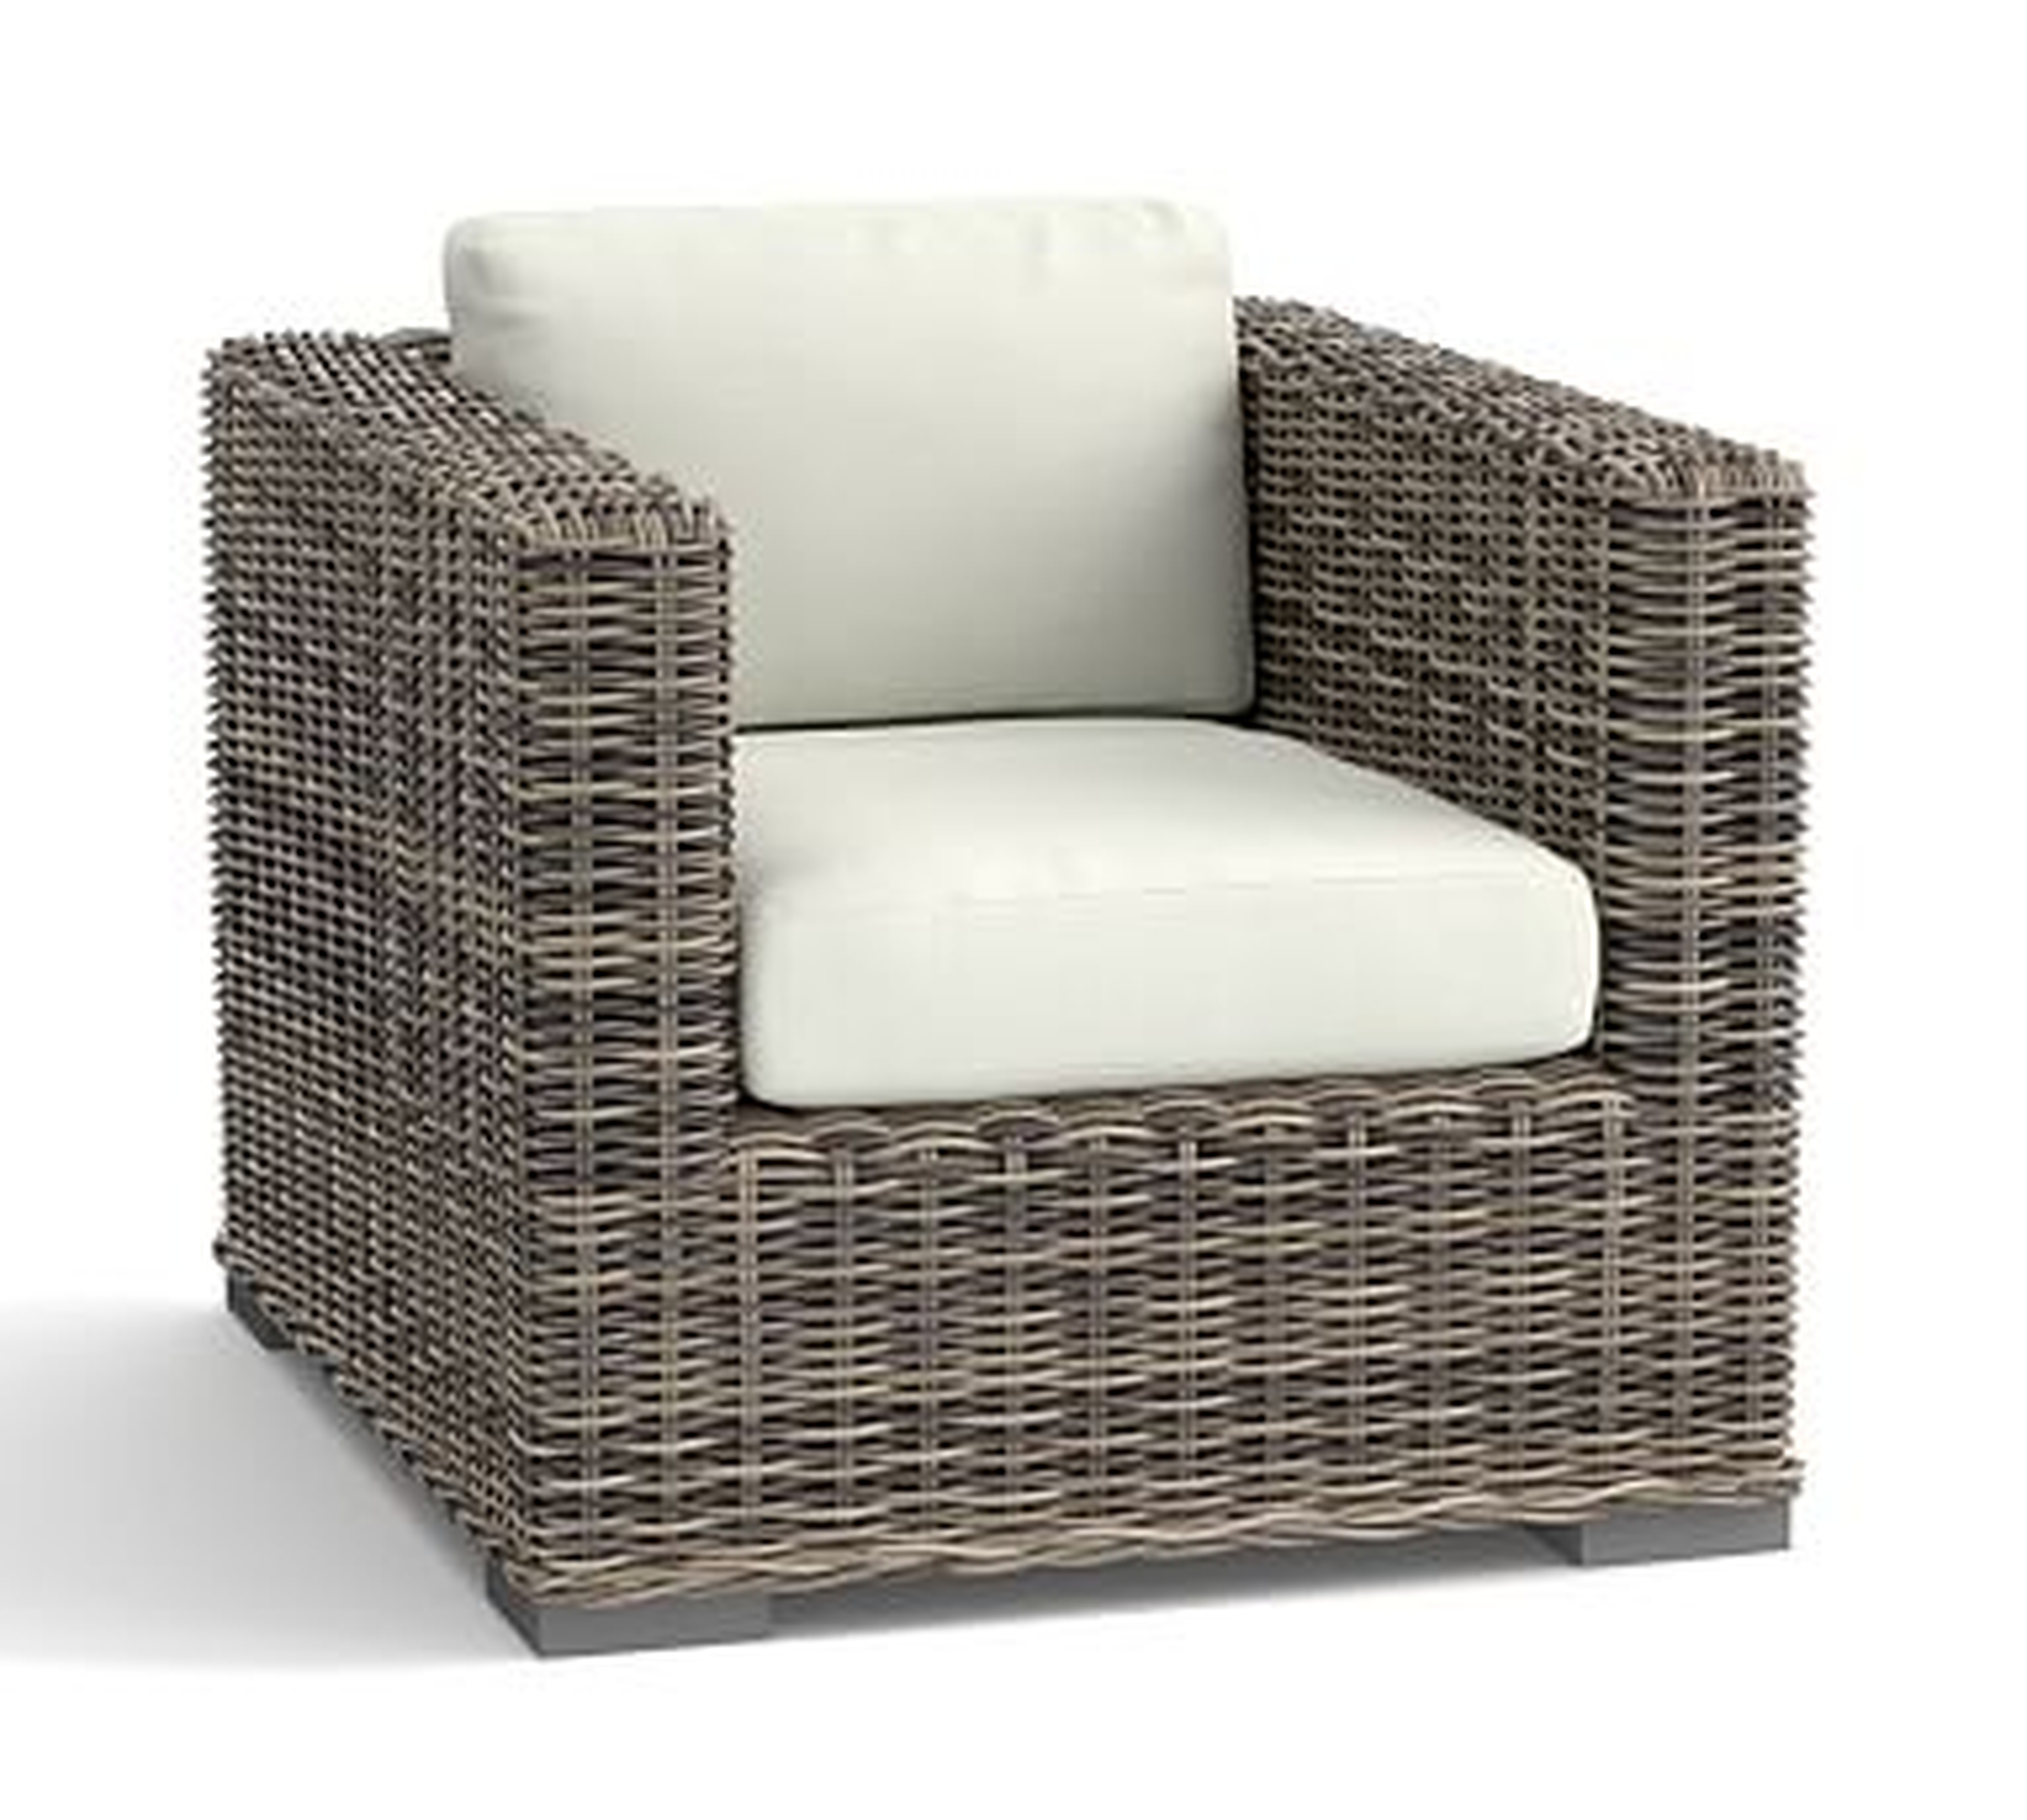 Huntington All-Weather Wicker Square-Arm Occasional Chair, Gray - Pottery Barn